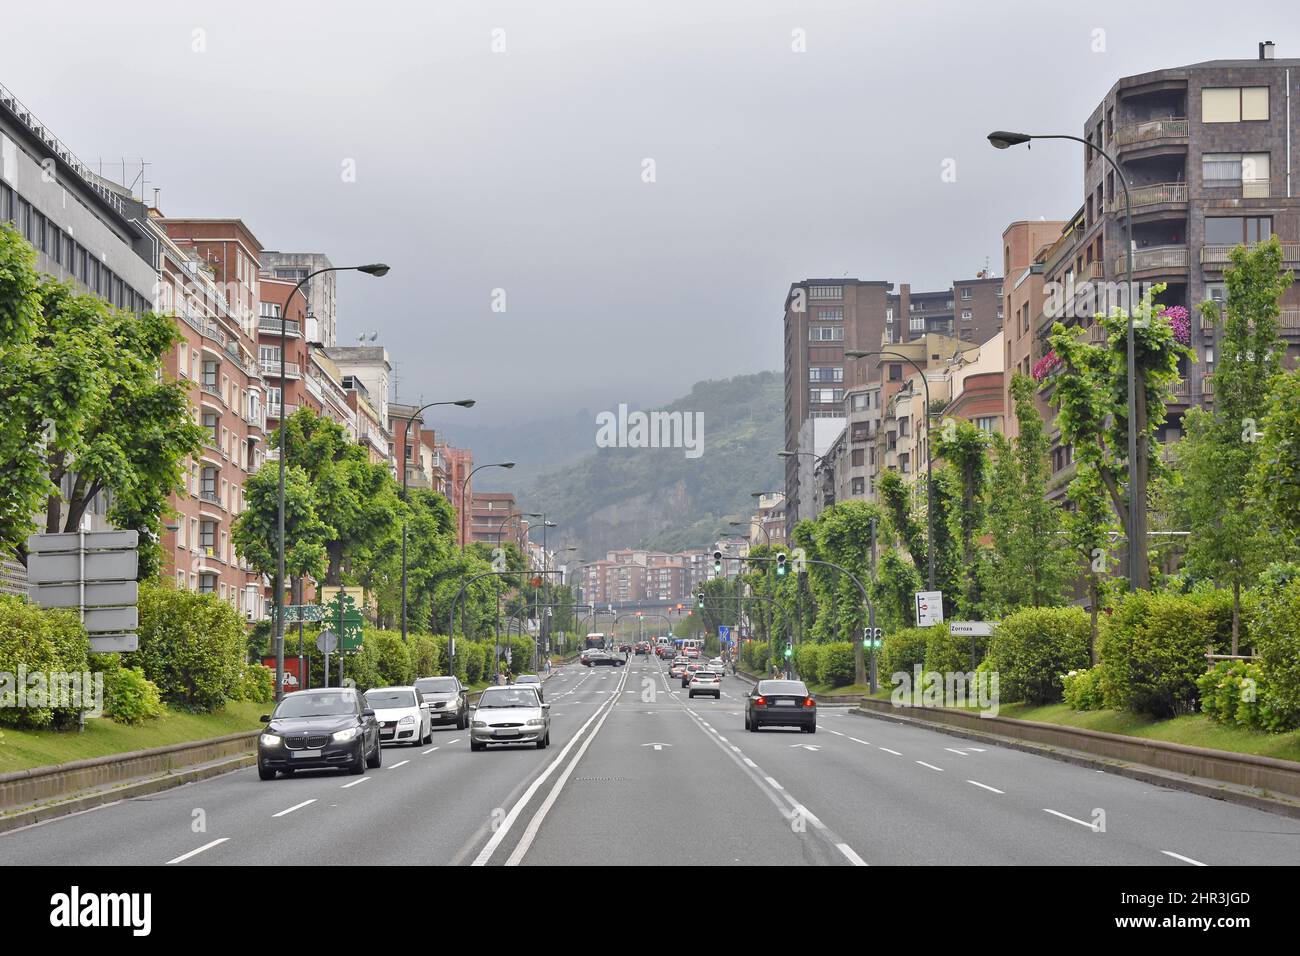 Cars on driveway and residential properties in Bilbao Basque Country Spain. Stock Photo